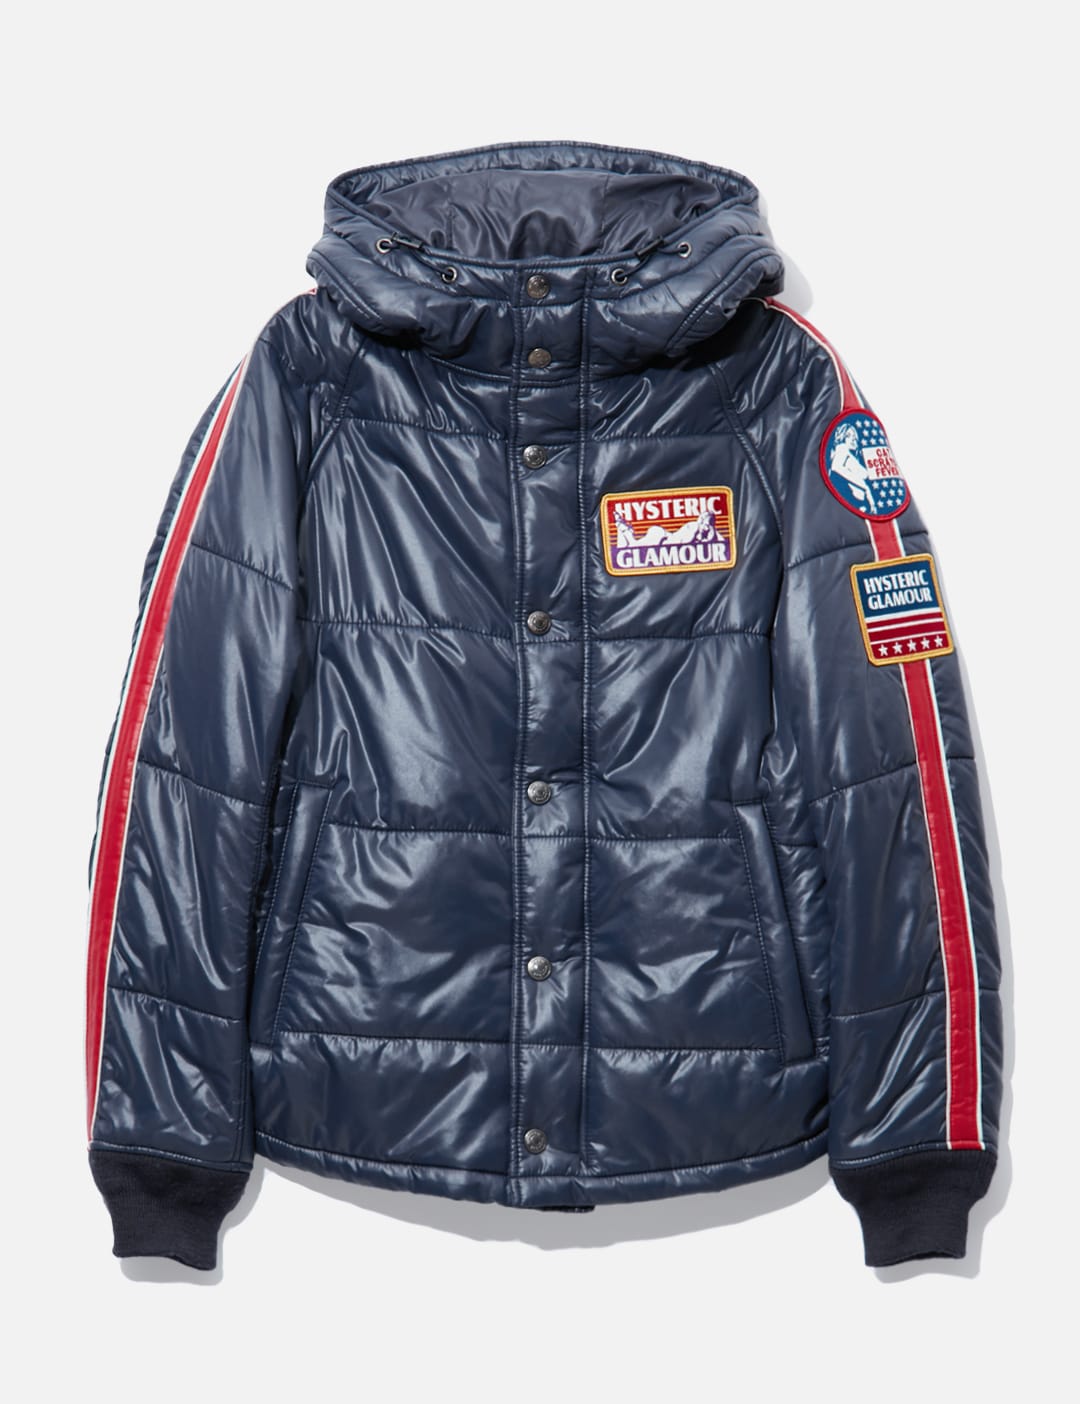 Hysteric Glamour - Hysteric Glamour Nylon Jacket with Patches